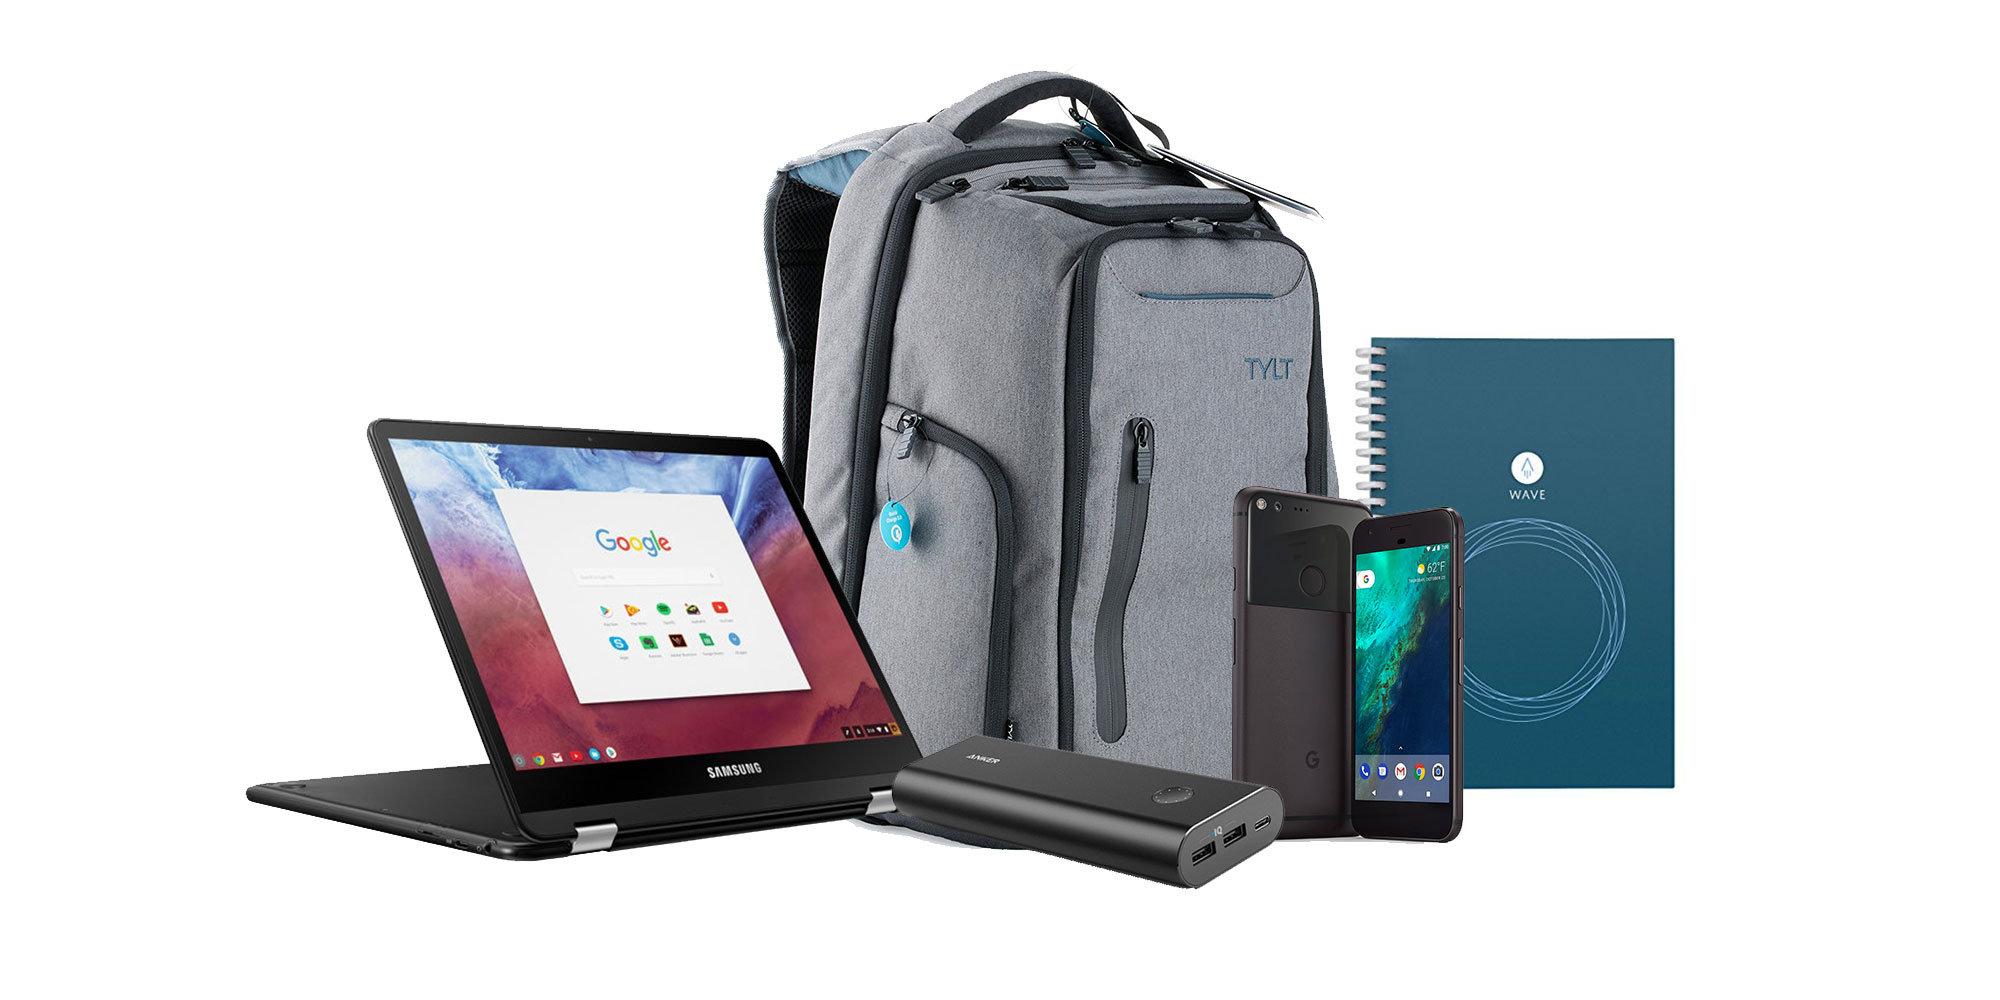 Back to school gift guide: best tech & accessories students